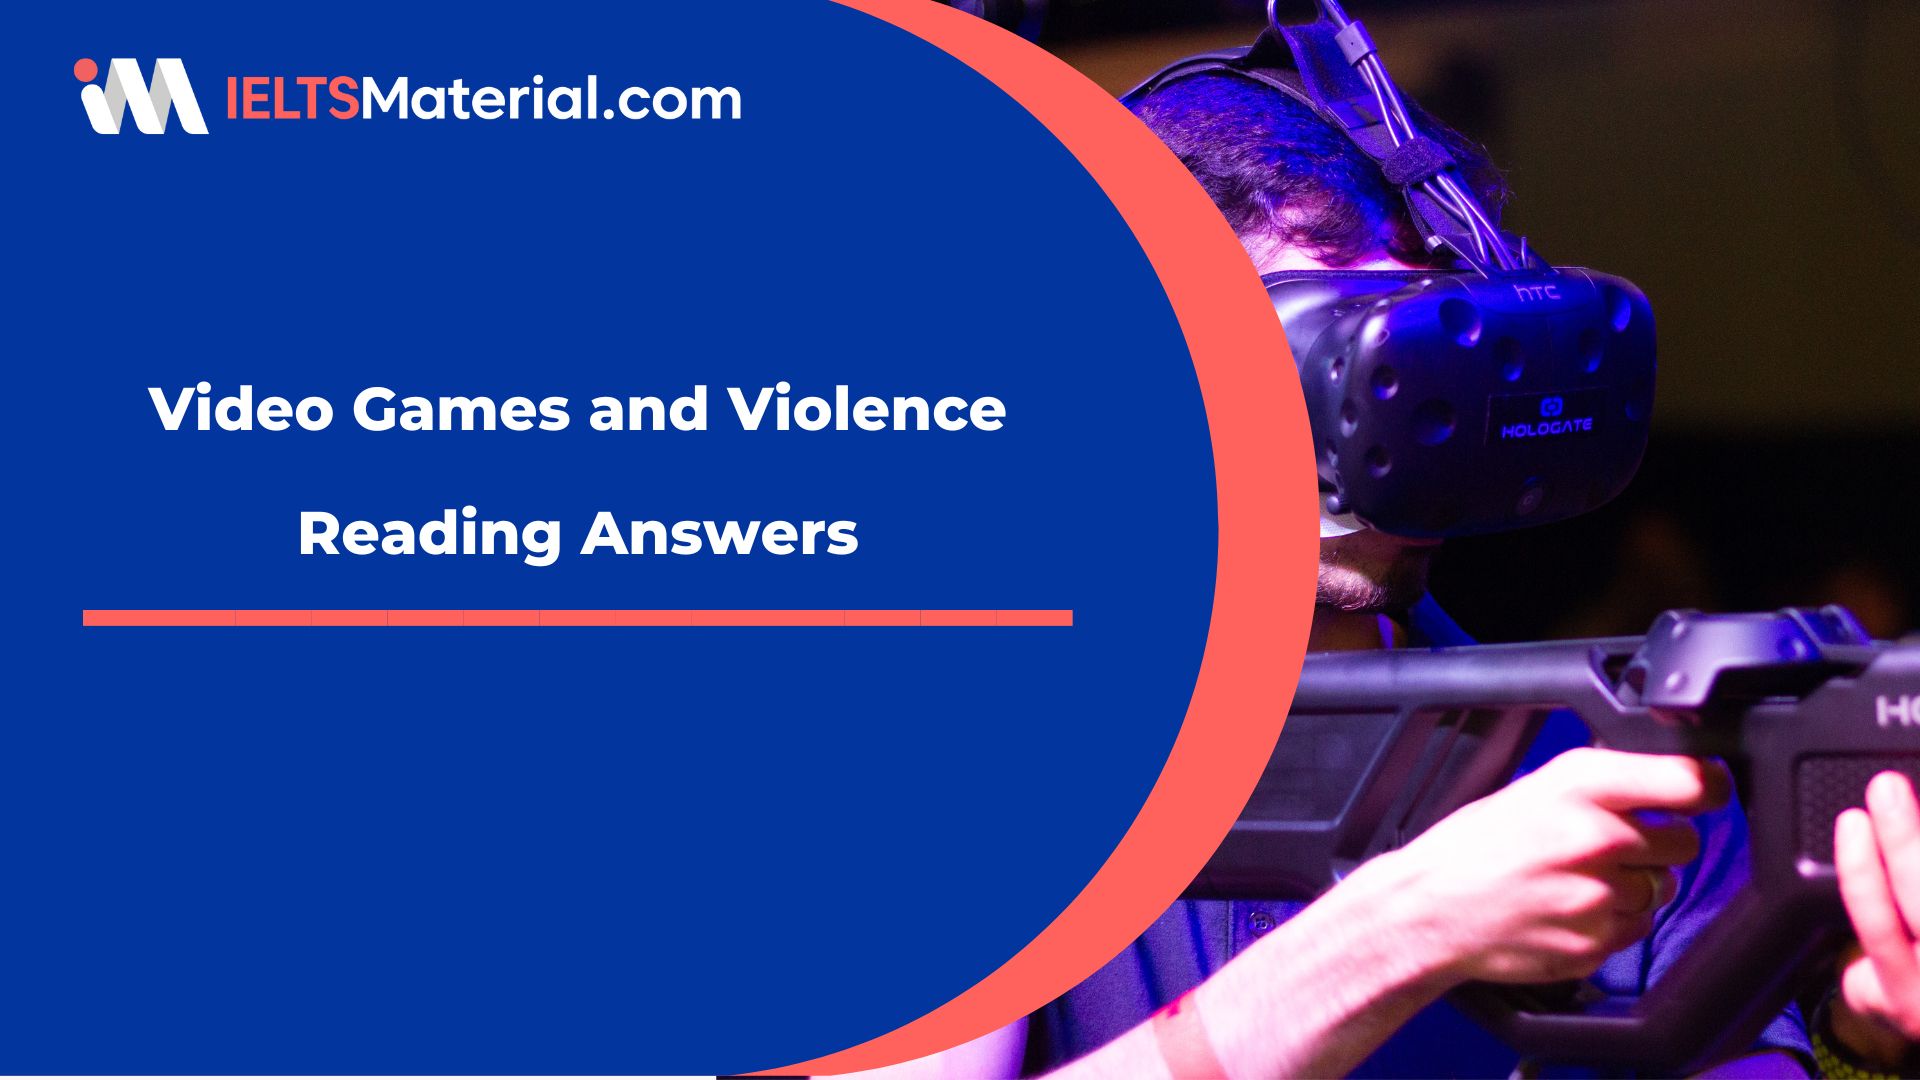 Video Games and Violence Reading Answers